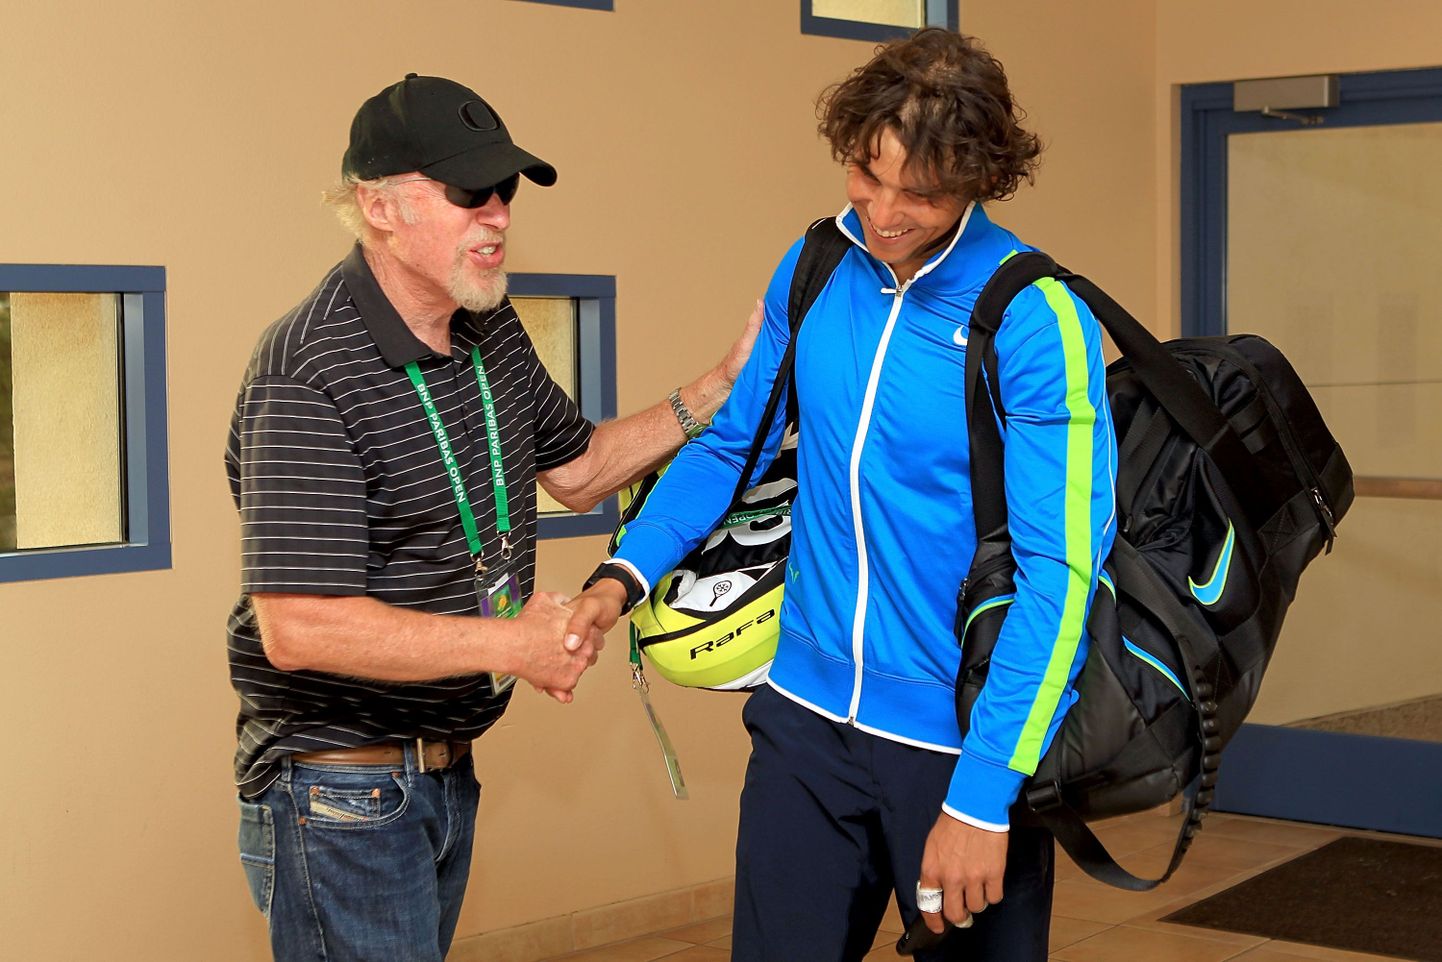 INDIAN WELLS, CA - MARCH 16: Phil Knight, founder and chairman of Nike, congratulates Rafael Nadal of Spain after his win over David Nalbandian of Argentina during the BNP Paribas Open at the Indian Wells Tennis Garden on March 16, 2012 in Indian Wells, California.   Matthew Stockman/Getty Images/AFP